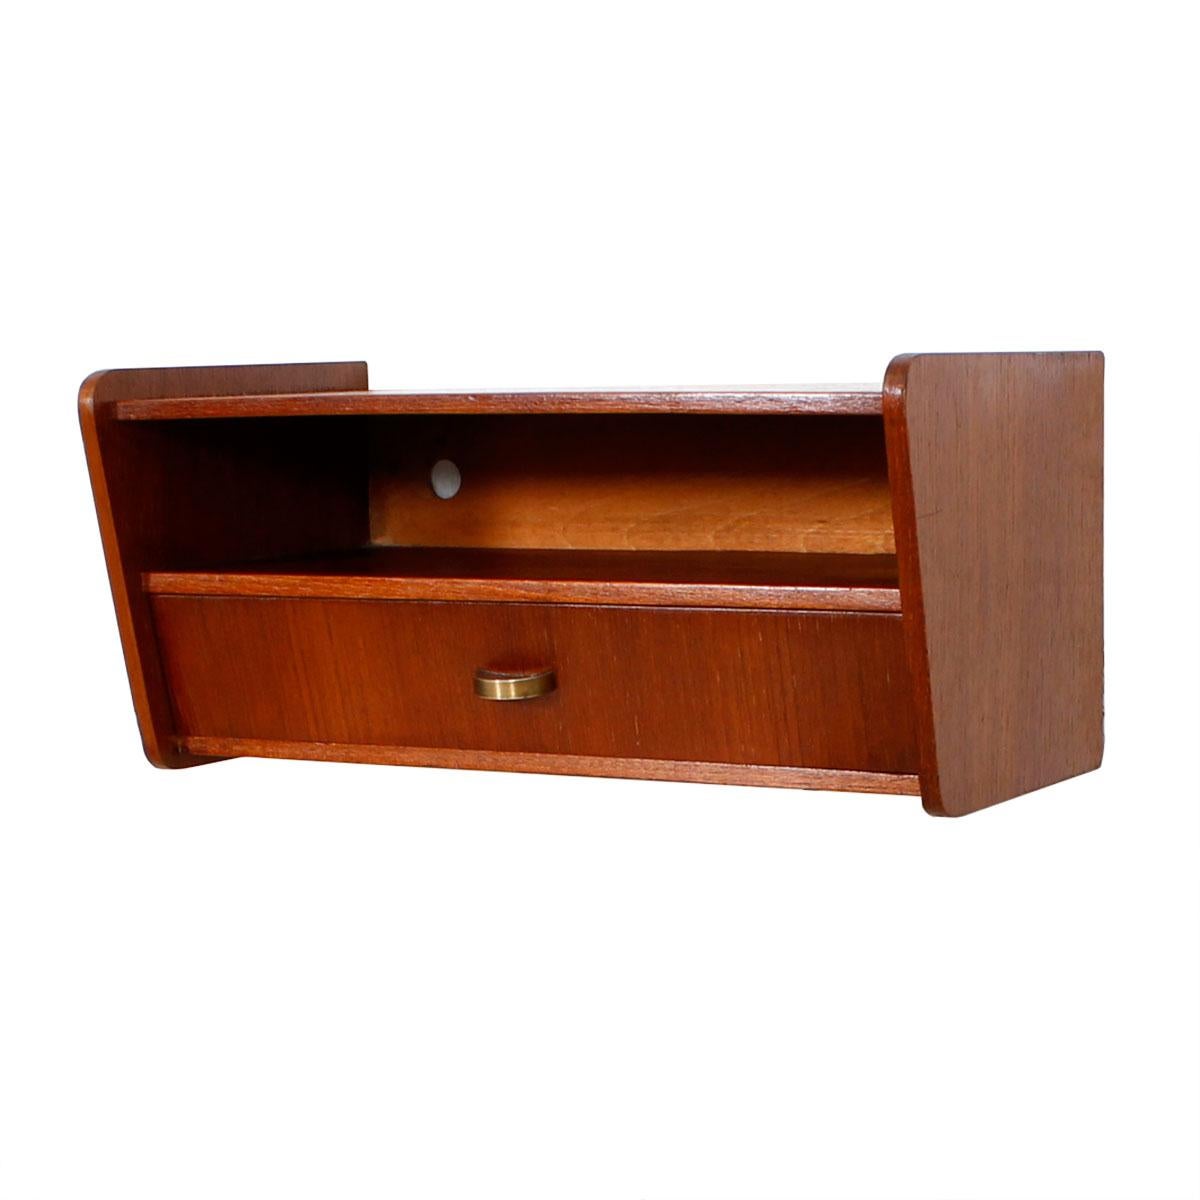 Danish Modern Teak Hanging Drawer with Cubby Hole Storage In Good Condition For Sale In Kensington, MD